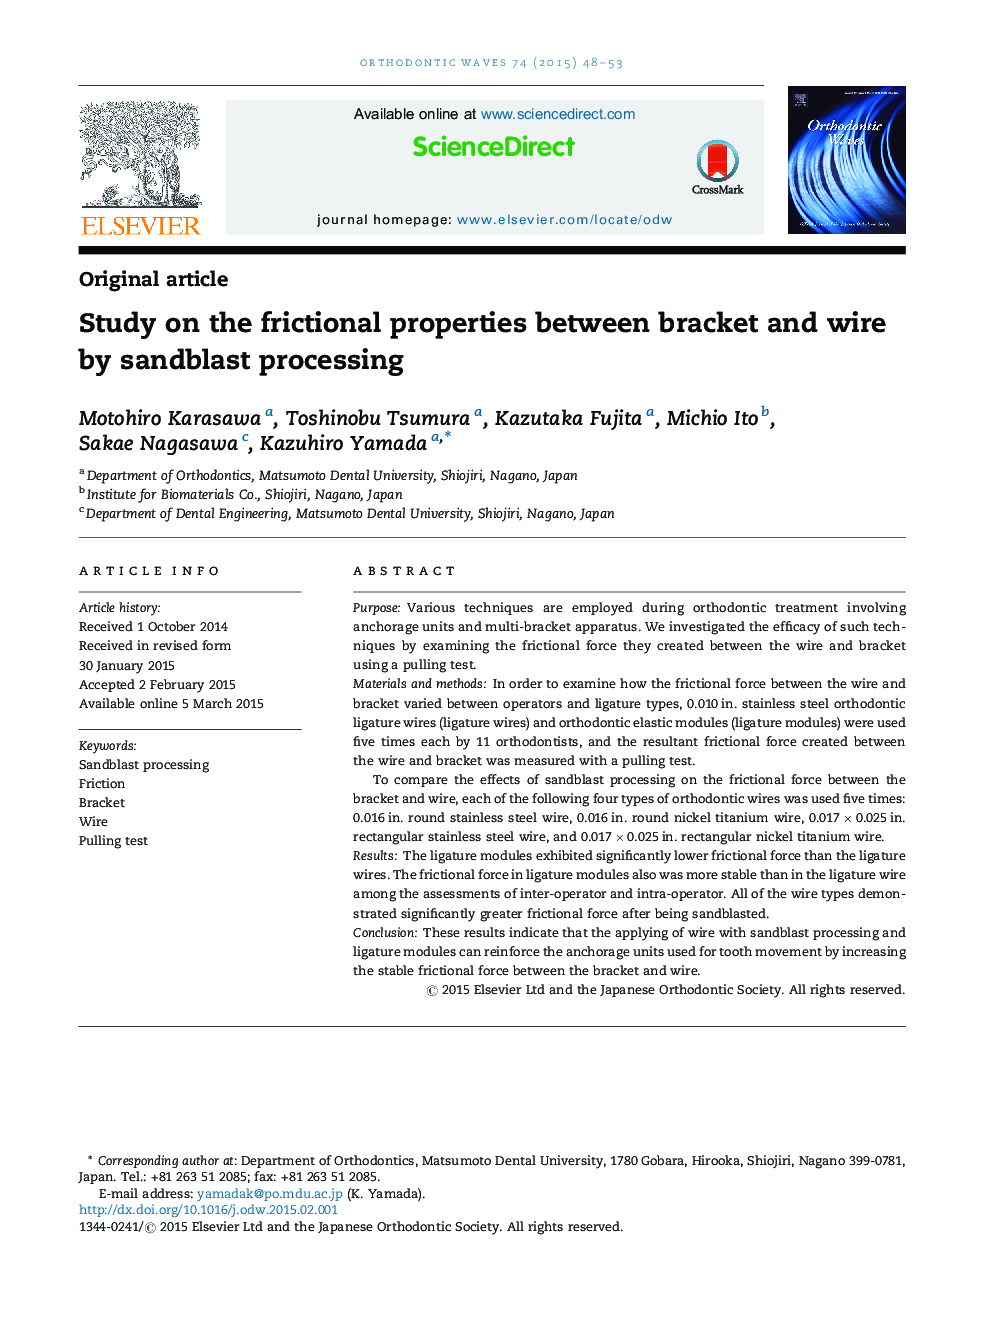 Study on the frictional properties between bracket and wire by sandblast processing